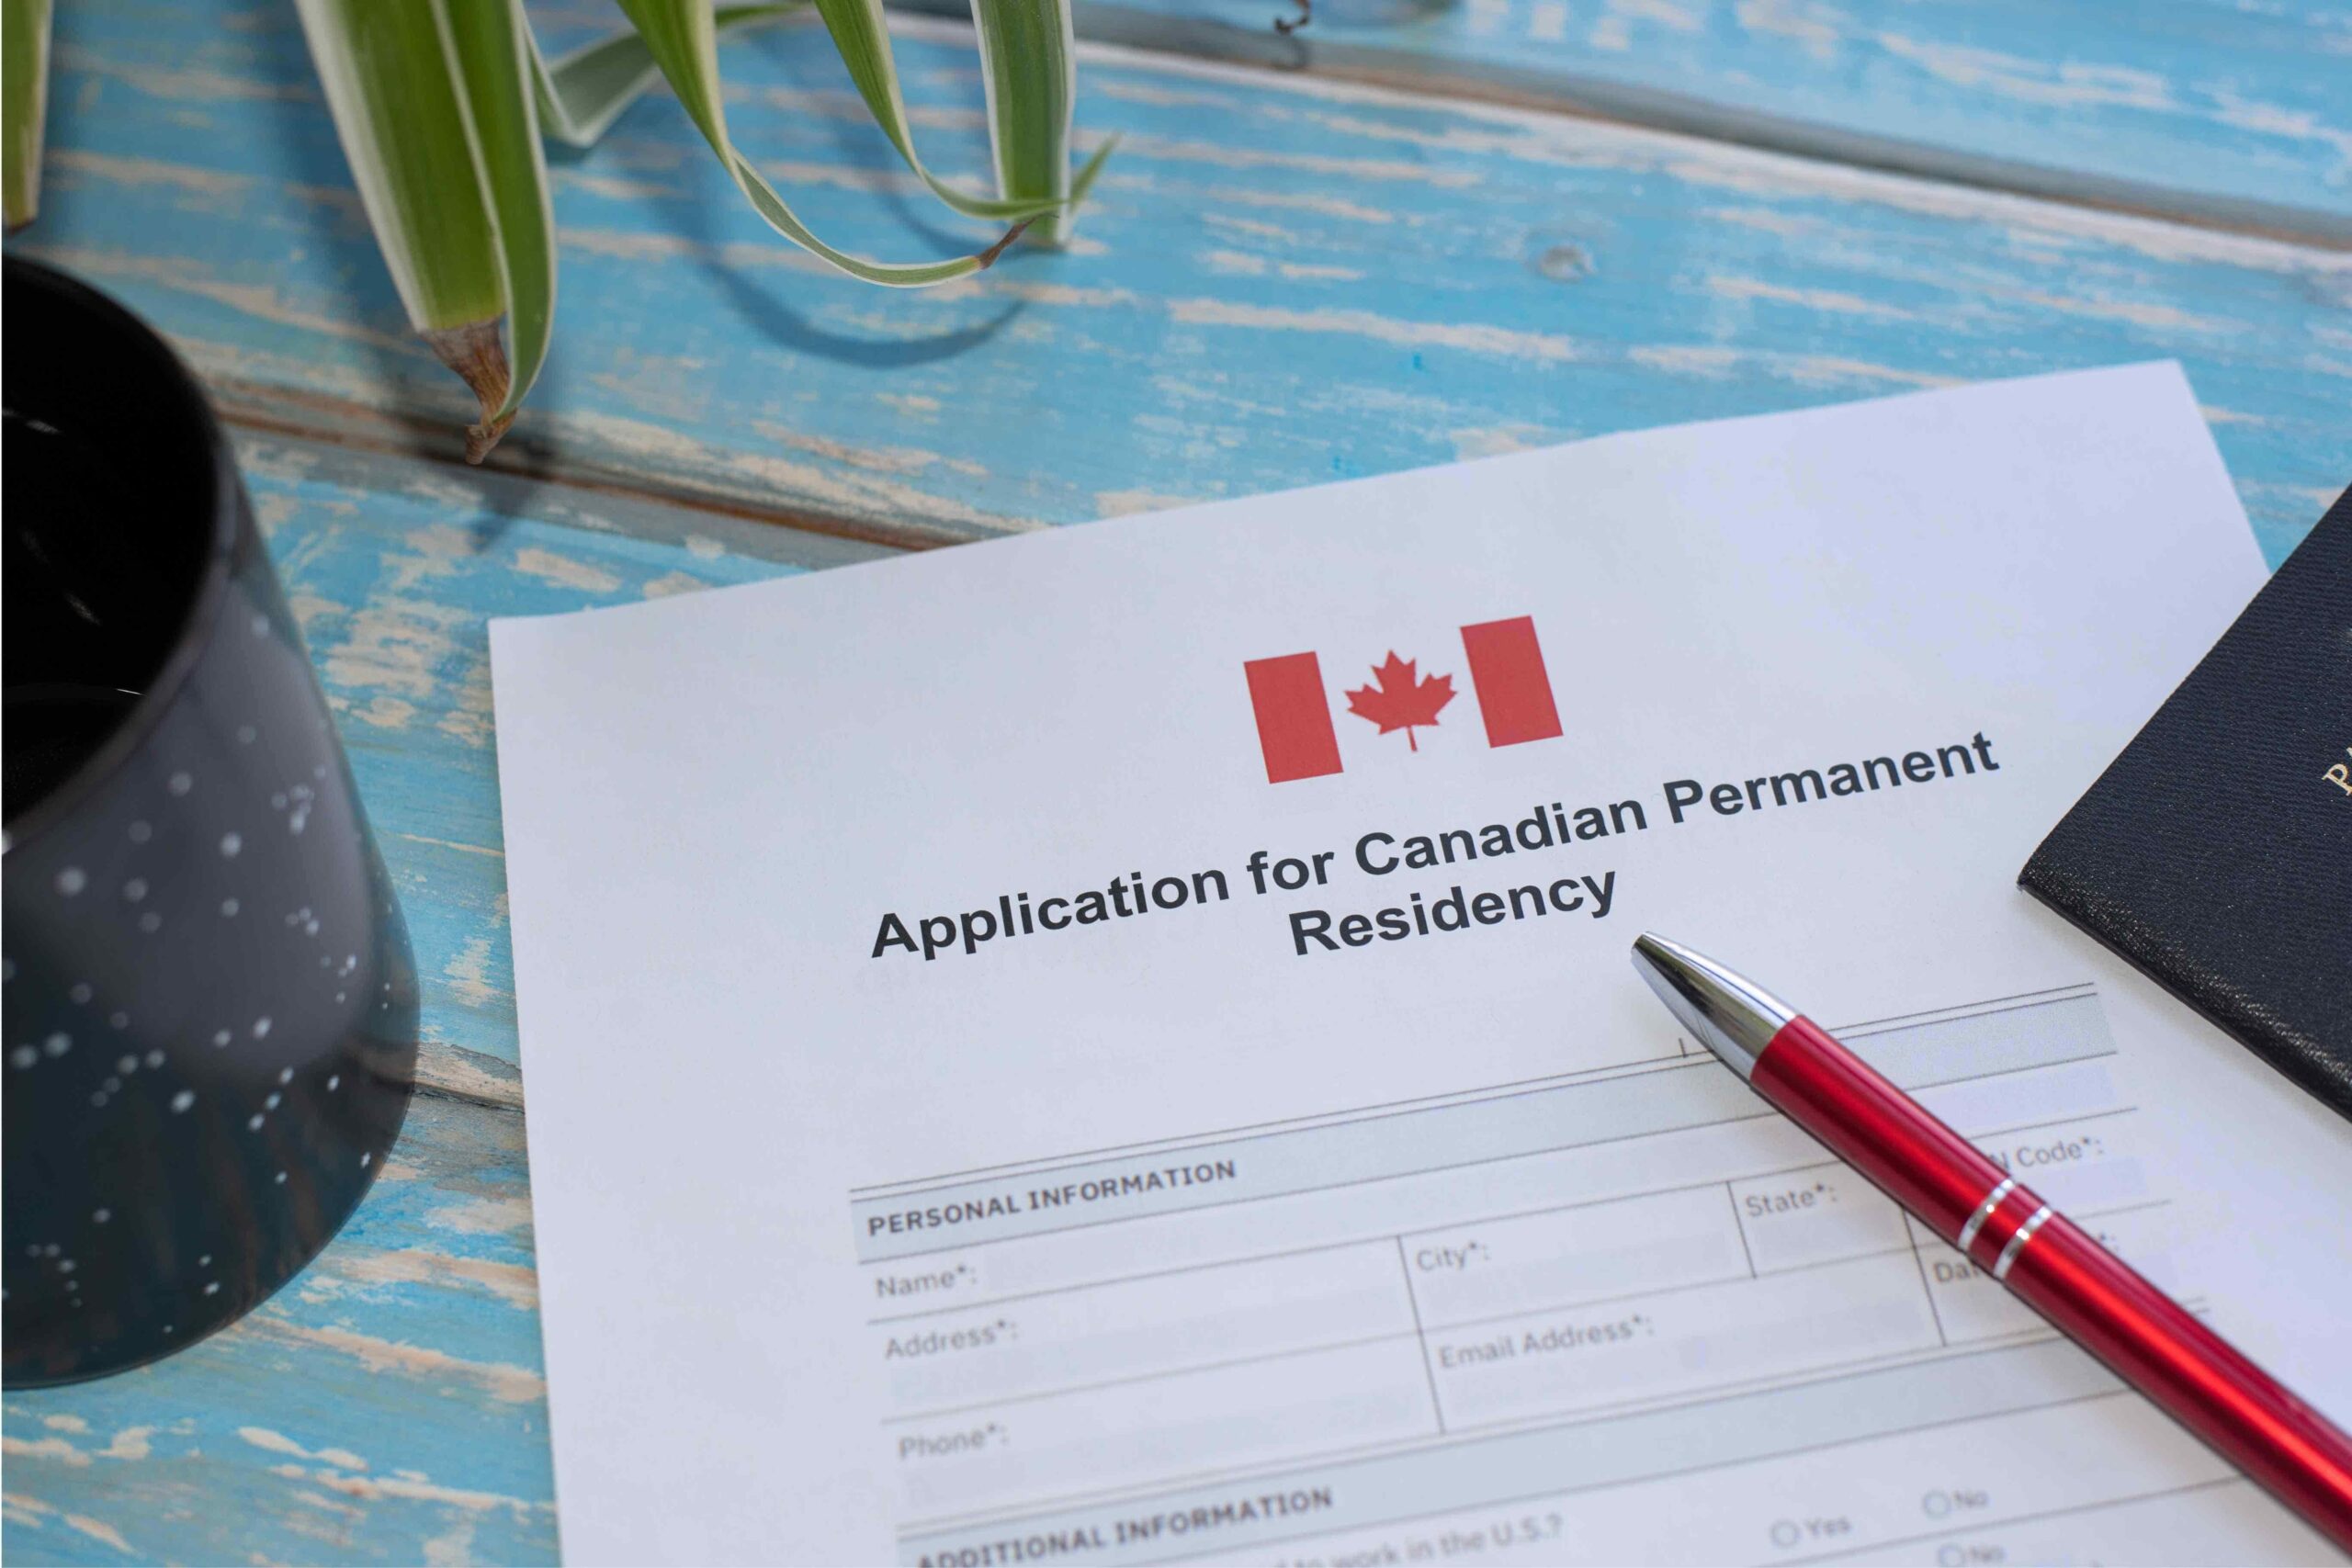 Canada Permanent Residency, What To Expect After Approval?